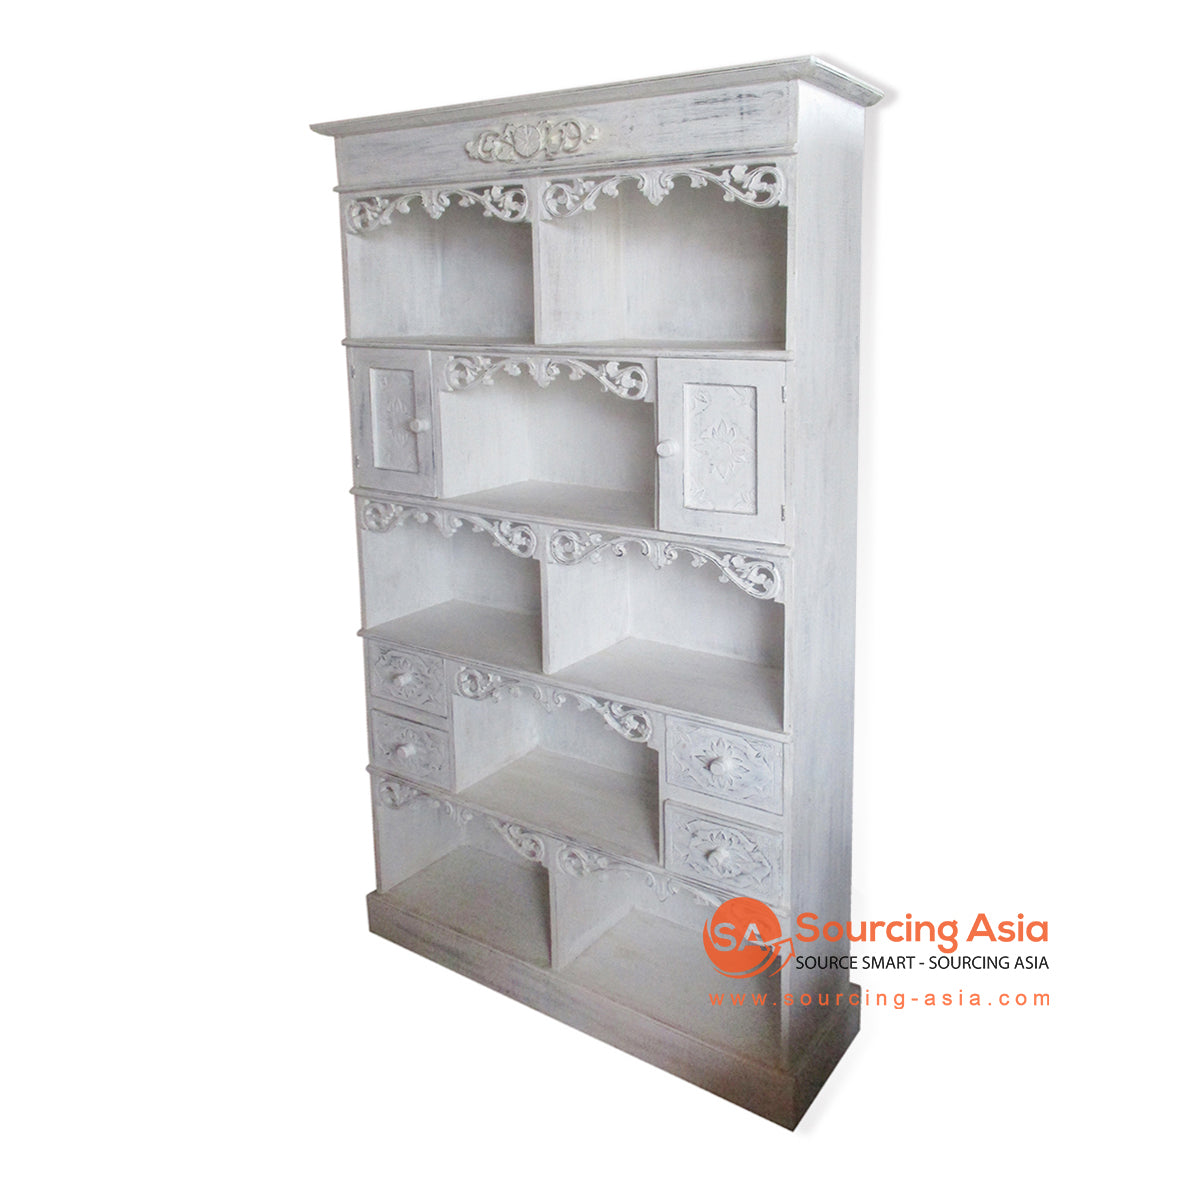 THE030WW WHITE WASH WOODEN RACK DISPLAY WITH 8 SLOTS, 4 DRAWERS AND 2 DOORS